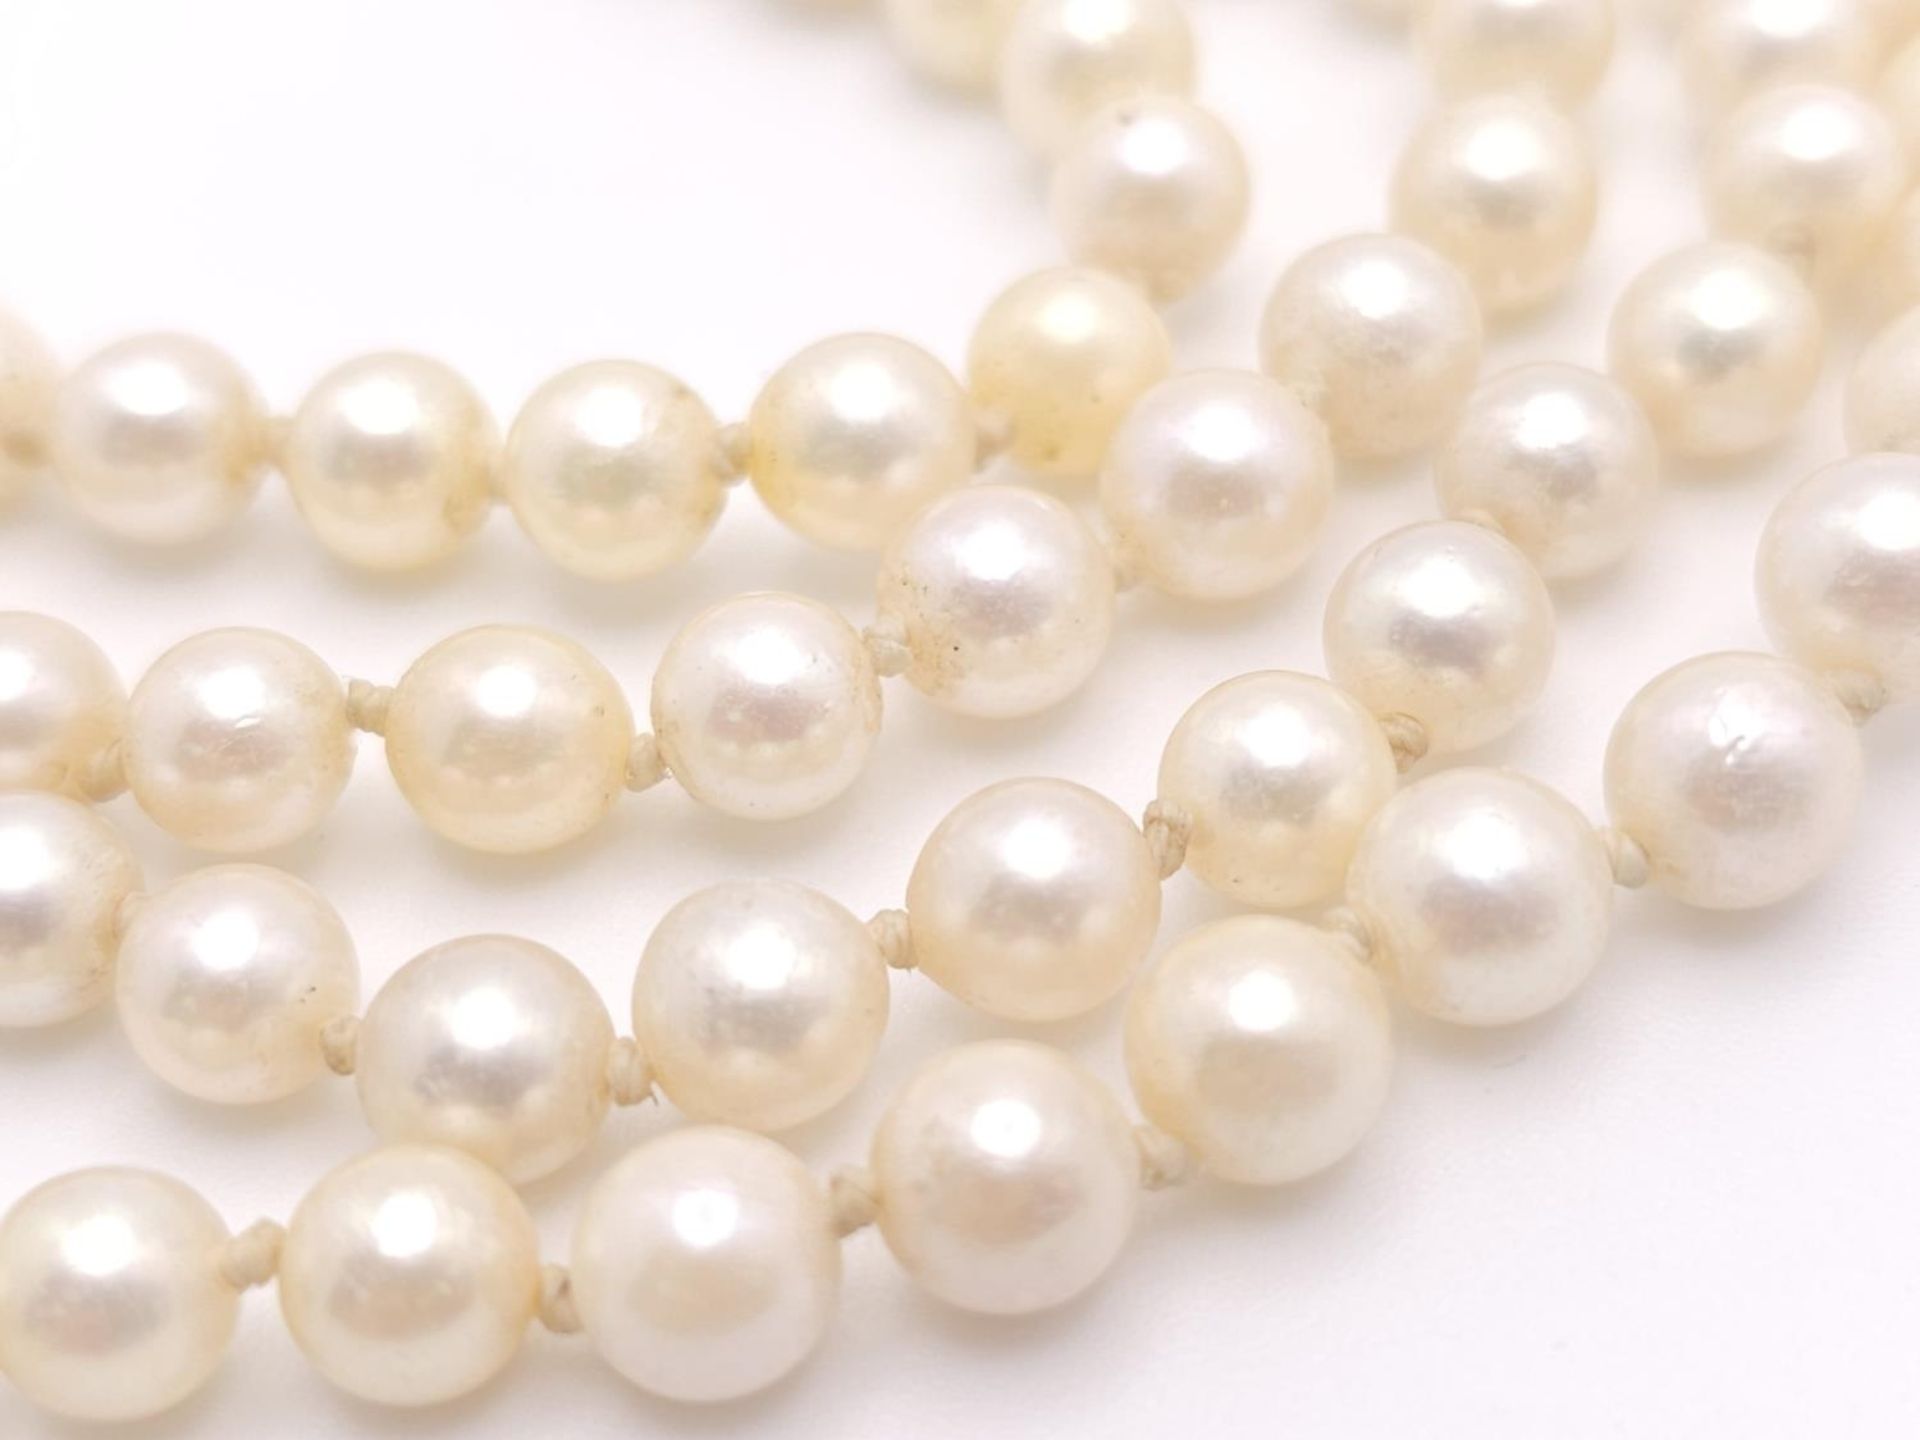 A Vintage Two Row Pearl Choker Necklace with a 14K Gold Clasp. 38cm. - Image 2 of 6